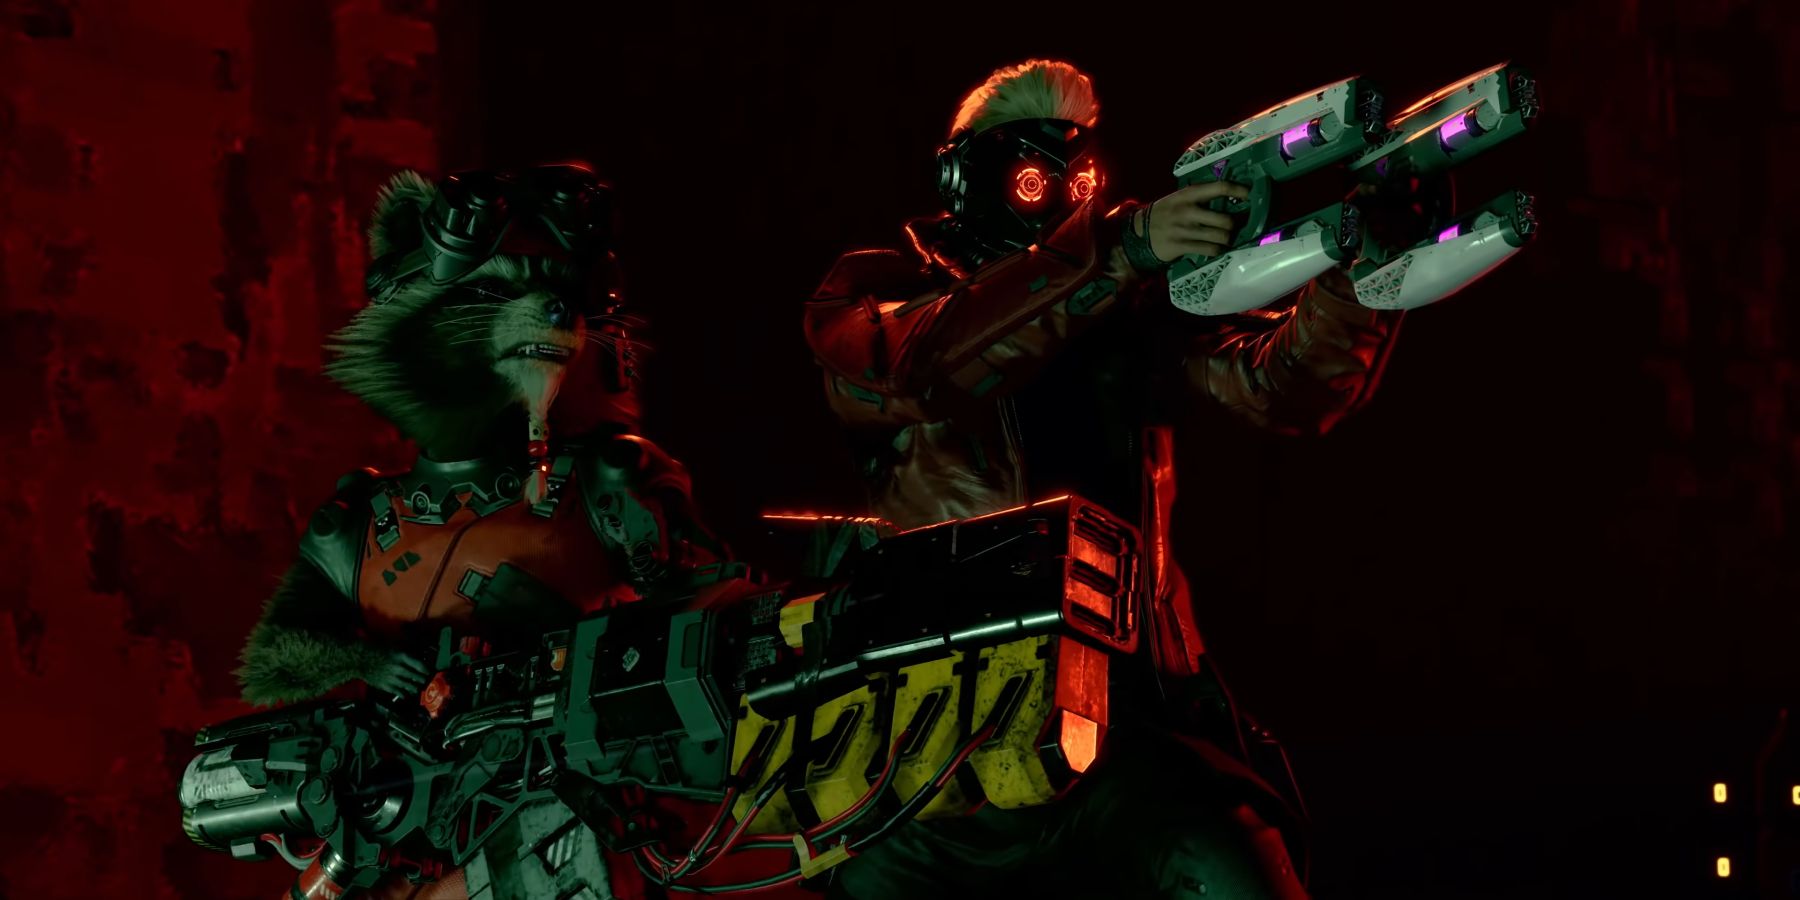 Rocket and Star-Lord aiming their blasters in Marvel’s Guardians of the Galaxy